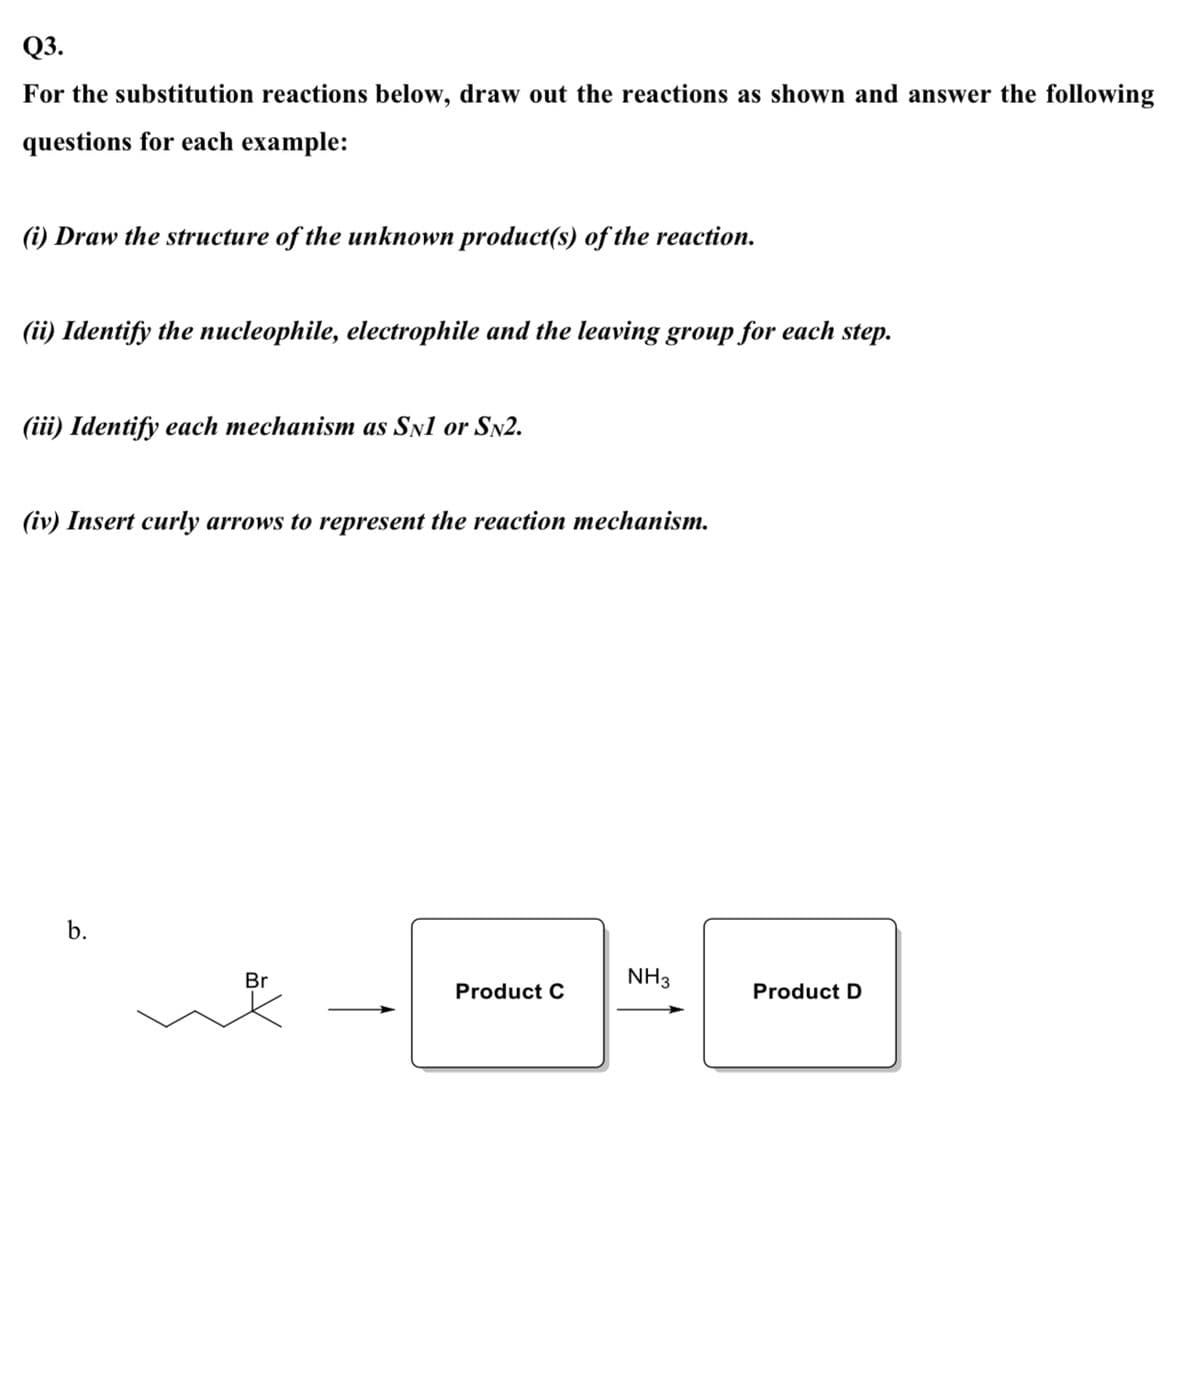 Q3.
For the substitution reactions below, draw out the reactions as shown and answer the following
questions for each example:
(i) Draw the structure of the unknown product(s) of the reaction.
(ii) Identify the nucleophile, electrophile and the leaving group for each step.
(iii) Identify each mechanism as Sn1 or Sn2.
(iv) Insert curly arrows to represent the reaction mechanism.
b.
Br
NH3
Product C
Product D
